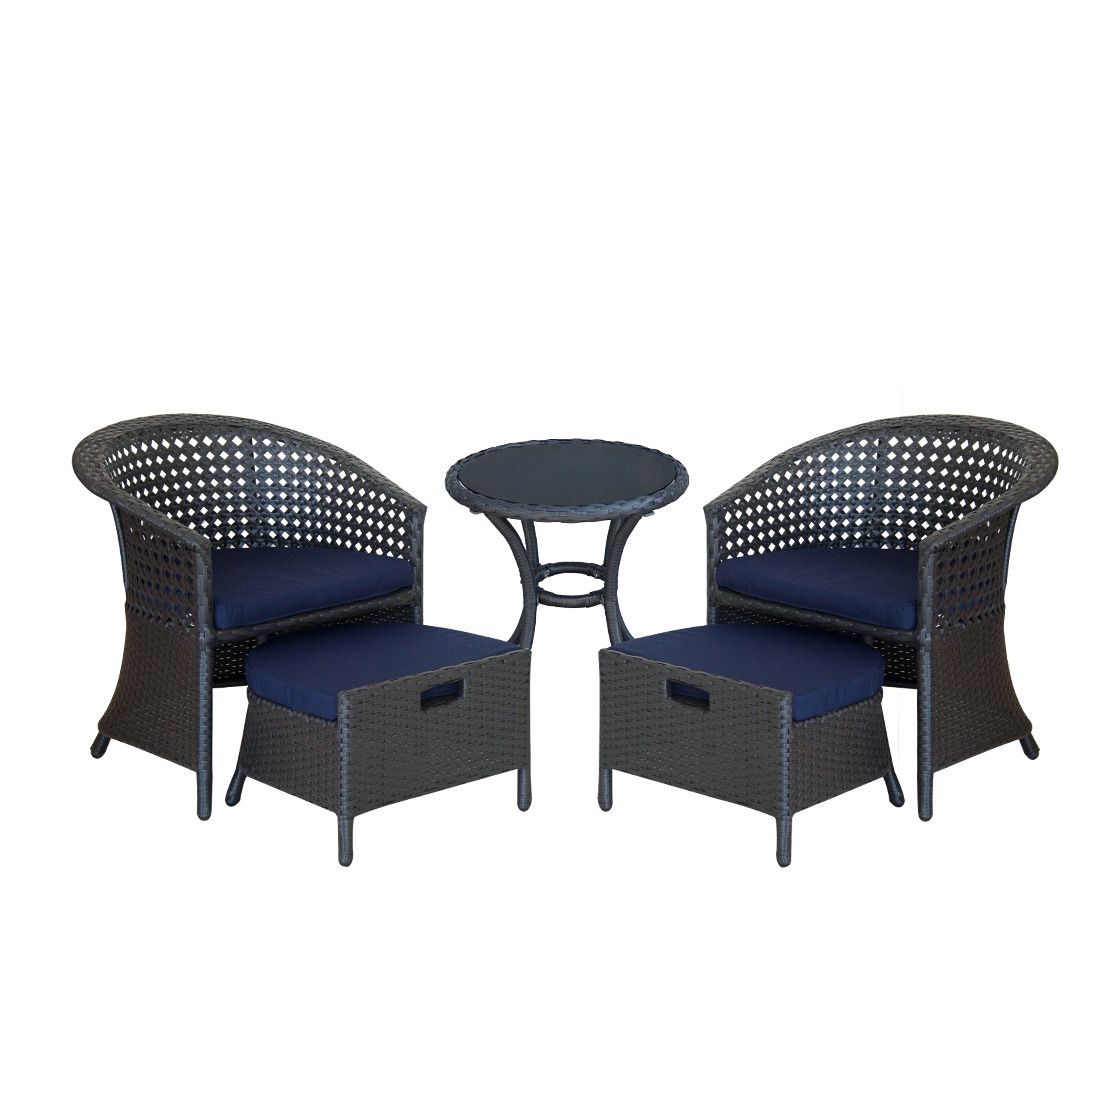 Final sale!!!5 Piece Outdoor Wicker Patio Furniture Conversation Sets with Sunbrella Cushion 2 chairs